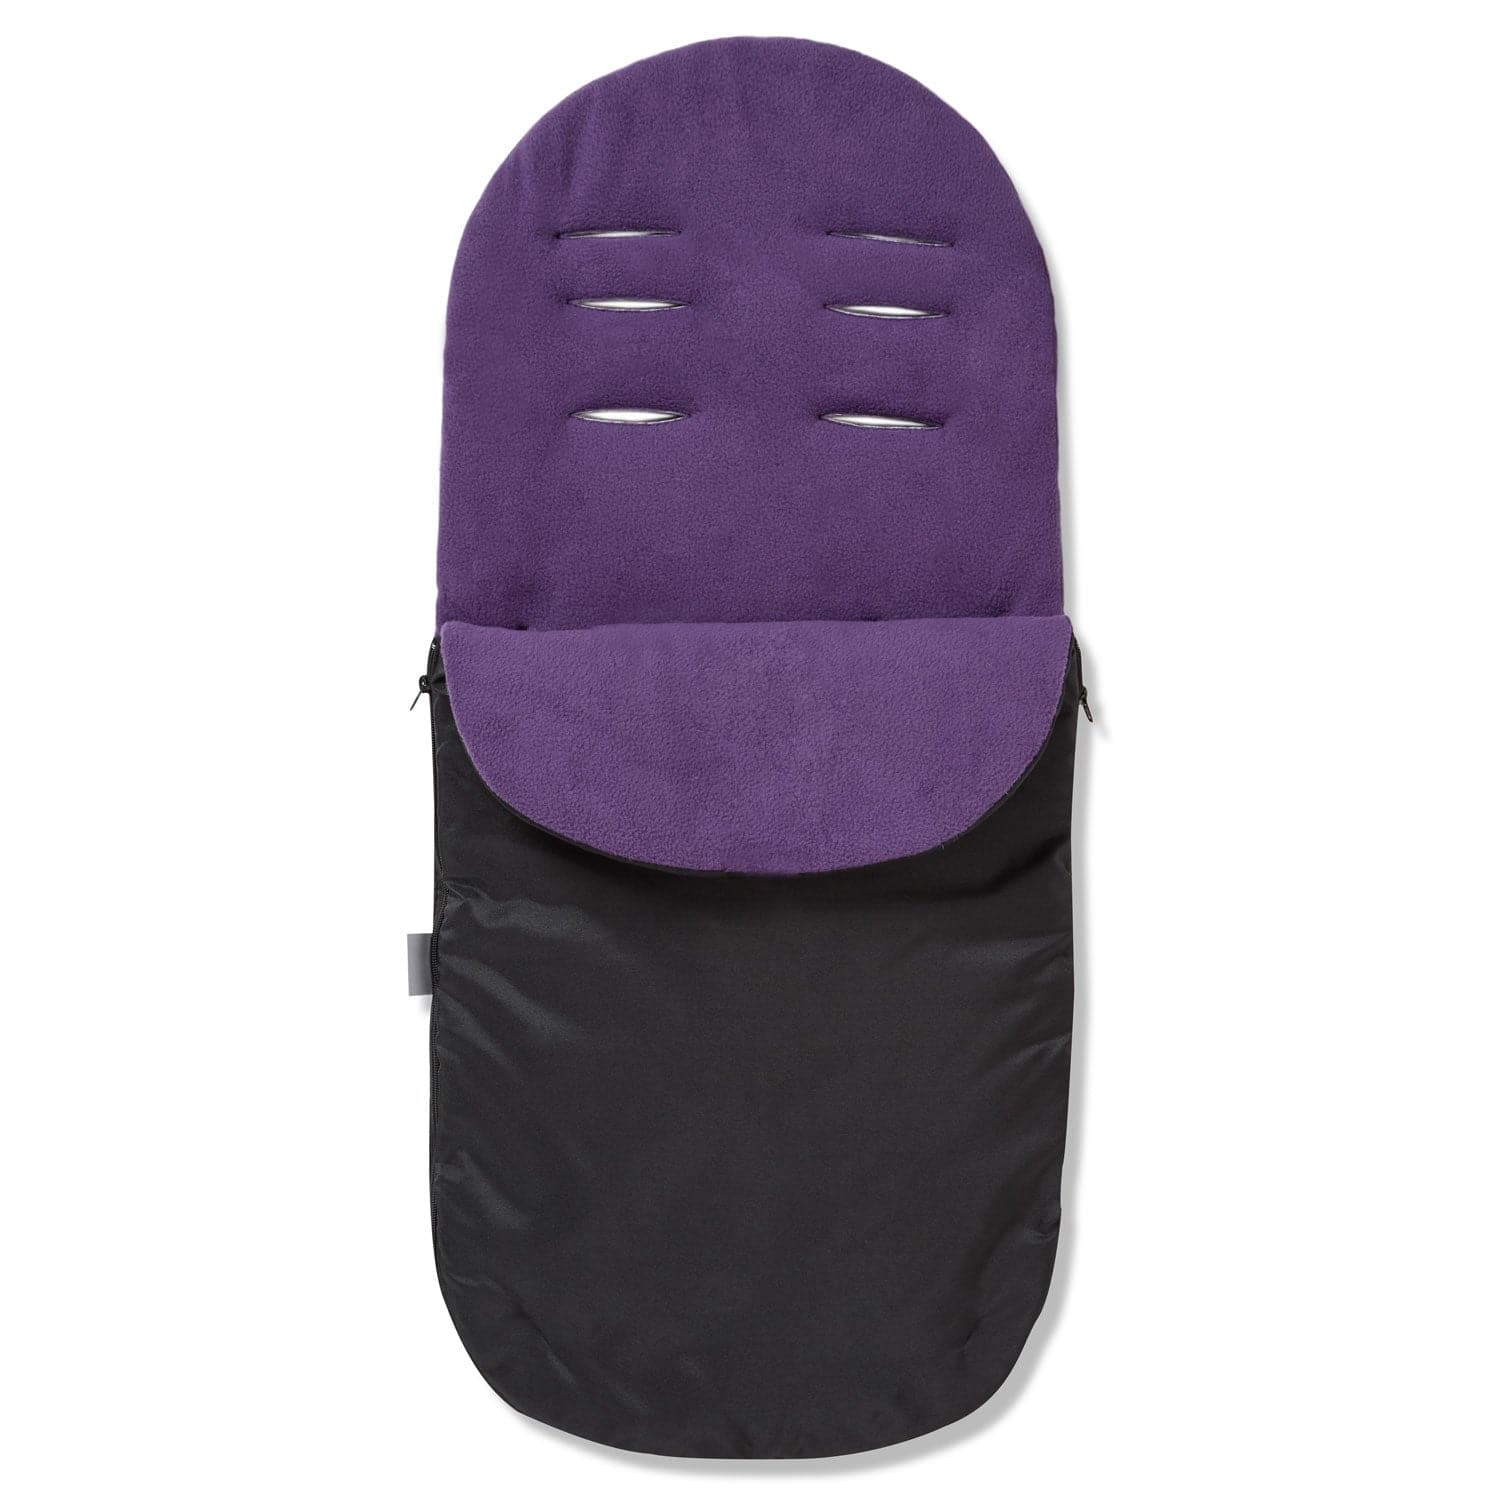 Footmuff / Cosy Toes Compatible with Silver Cross - Purple / Fits All Models | For Your Little One